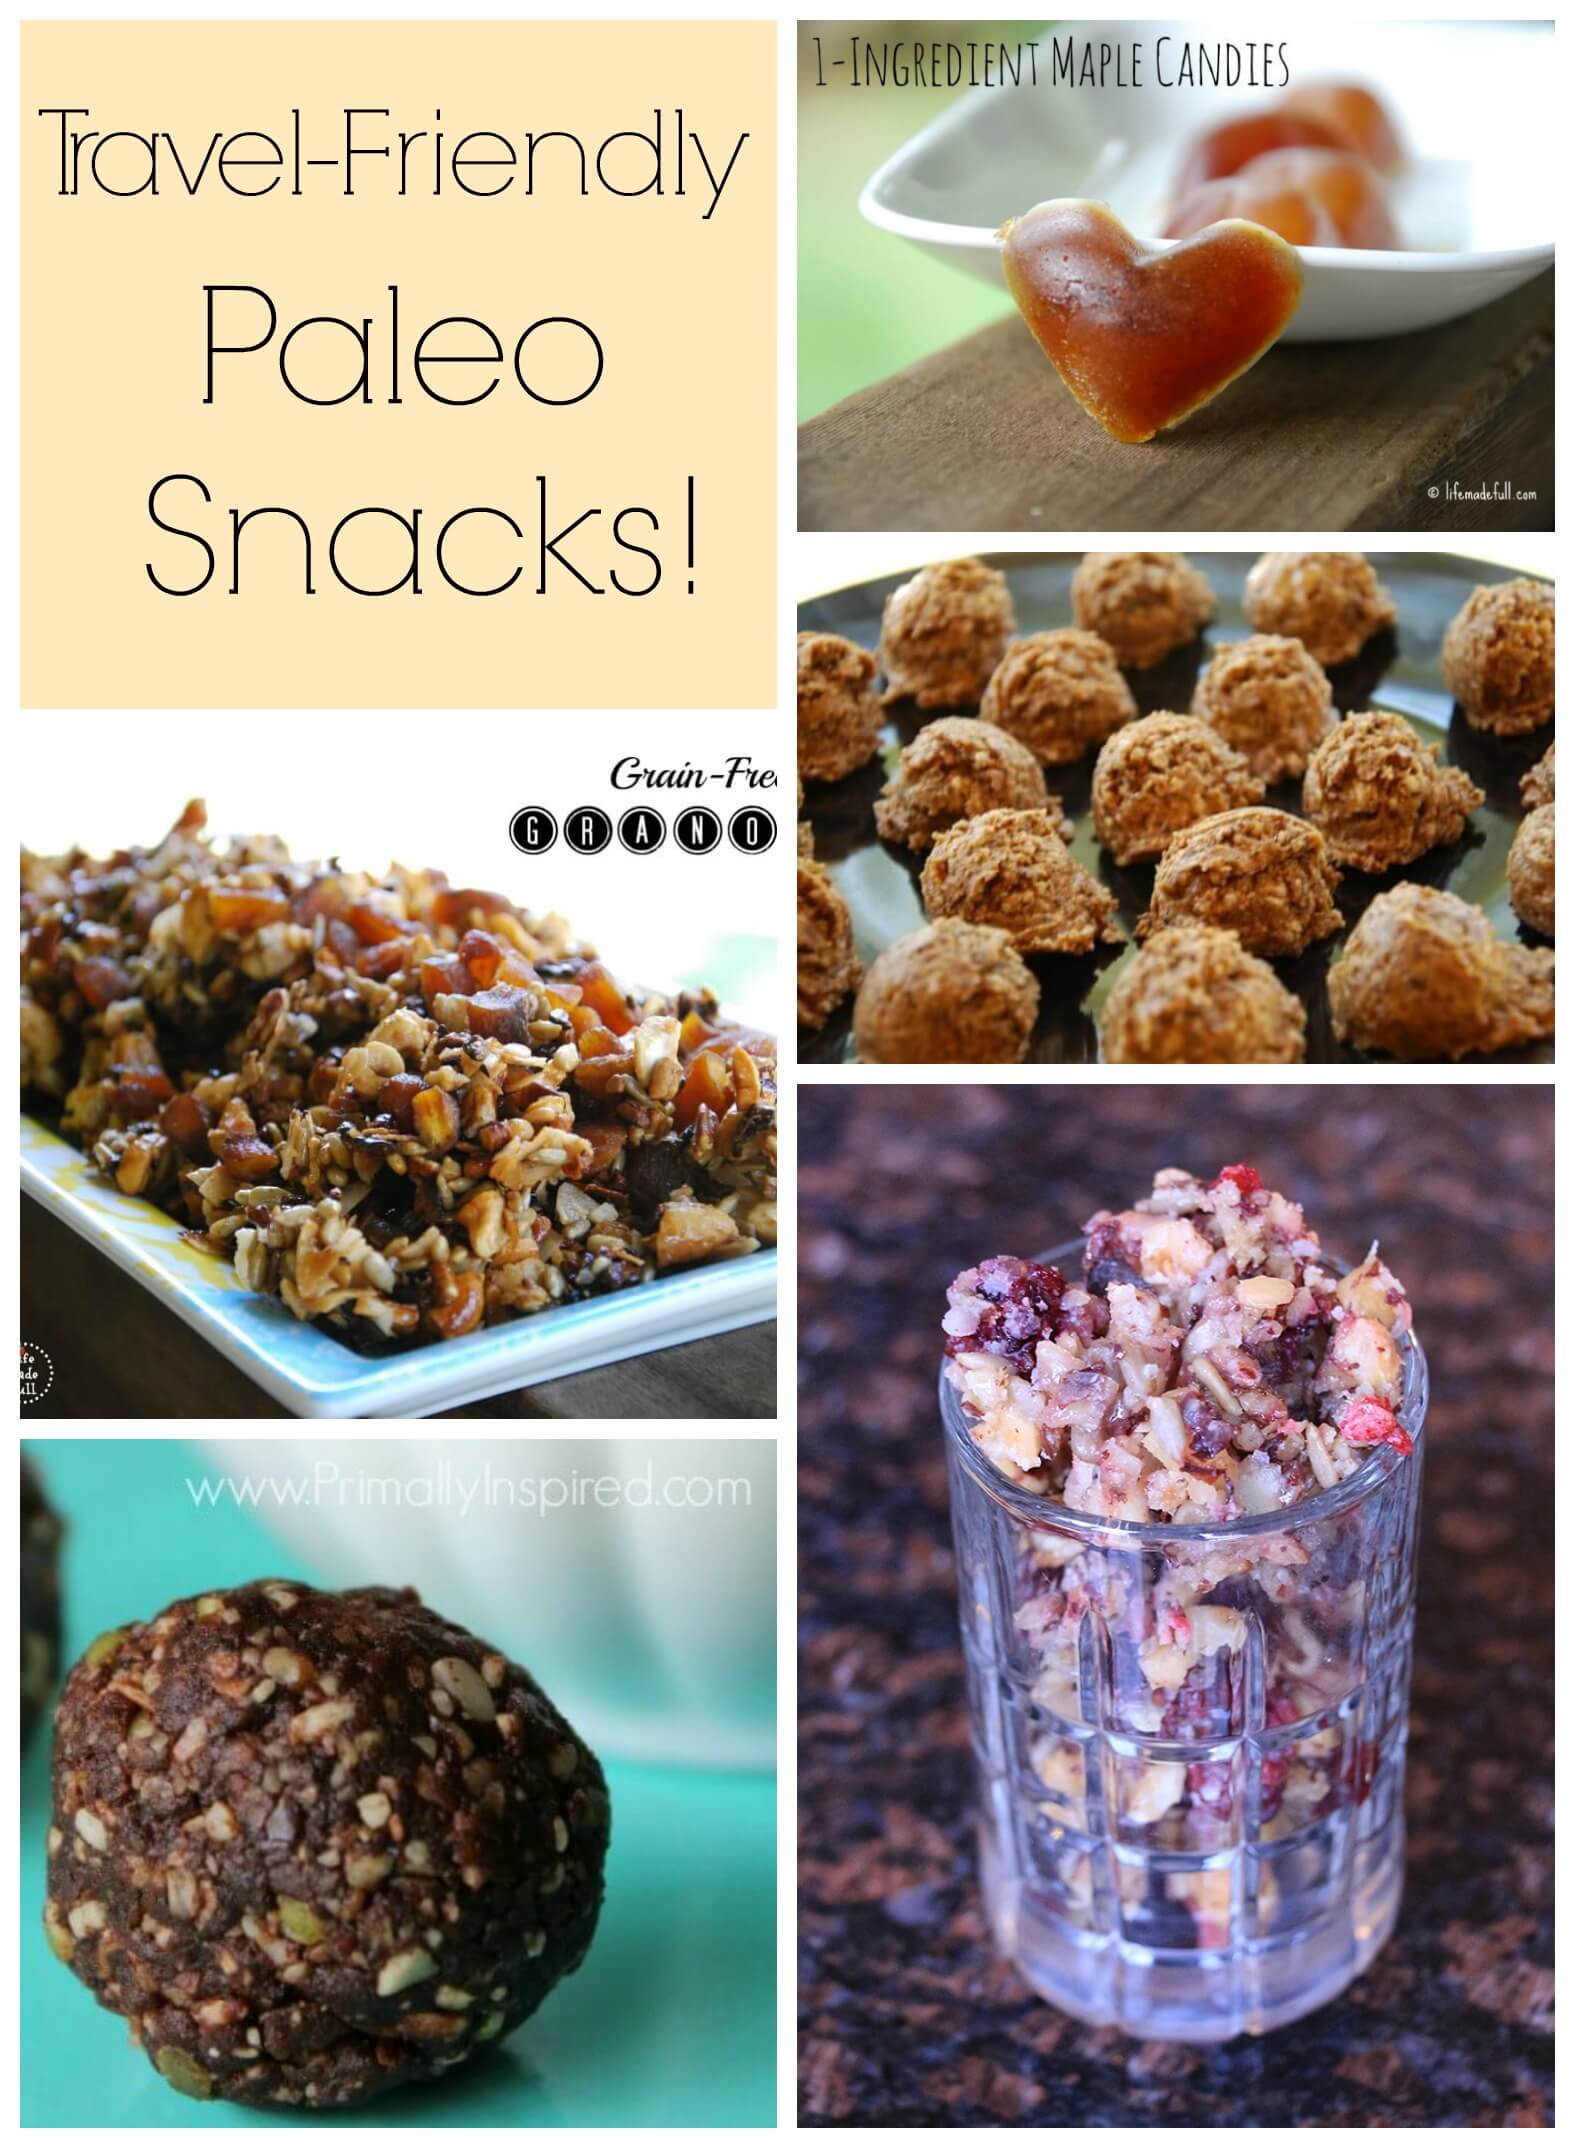 Travel-friendly paleo snacks - perfect for on-the-go!